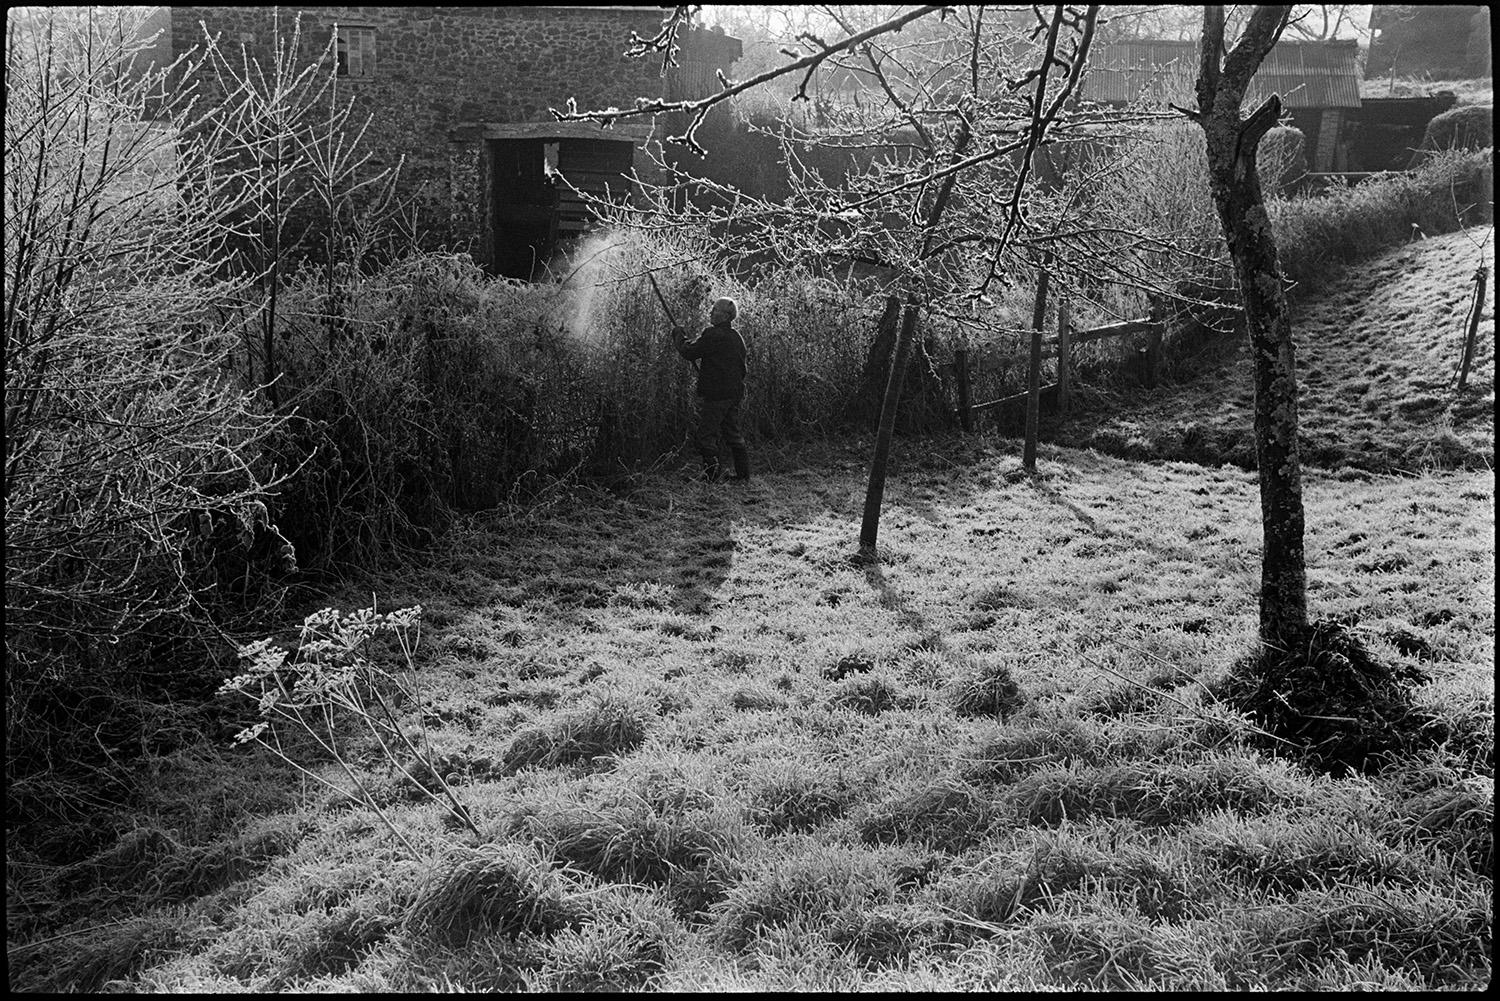 Orchards, Farmer laying hedge in frosty orchard, mill behind. 
[Bill Hammond laying a hedge in a frosty orchard at Rashleigh Mill, Bridge Reeve. The mill building and sheds can be seen in the background.]